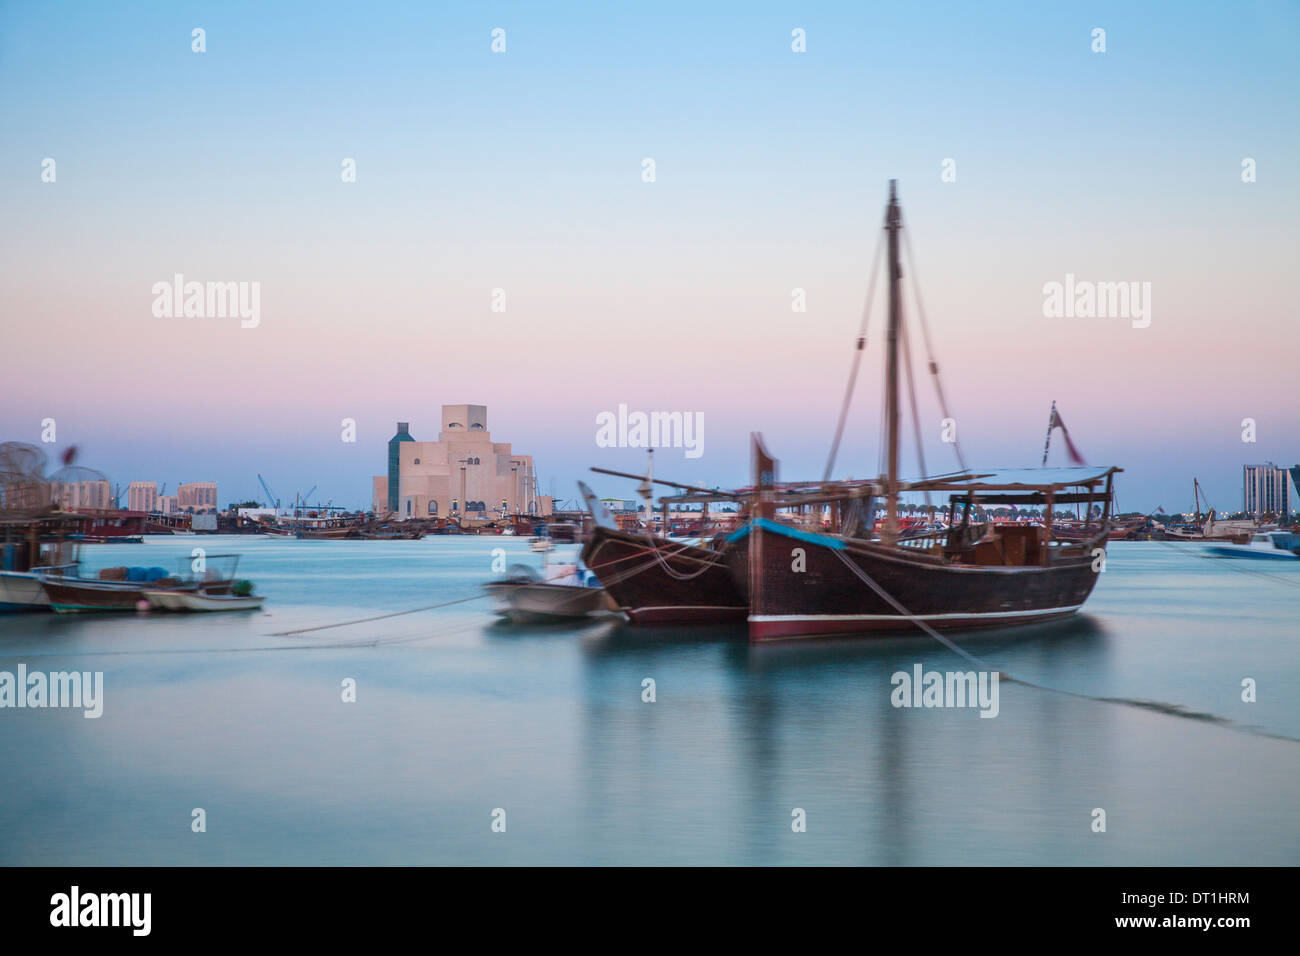 Boats in Doha Bay and Museum of Islamic Art, Doha, Qatar, Middle East Stock Photo